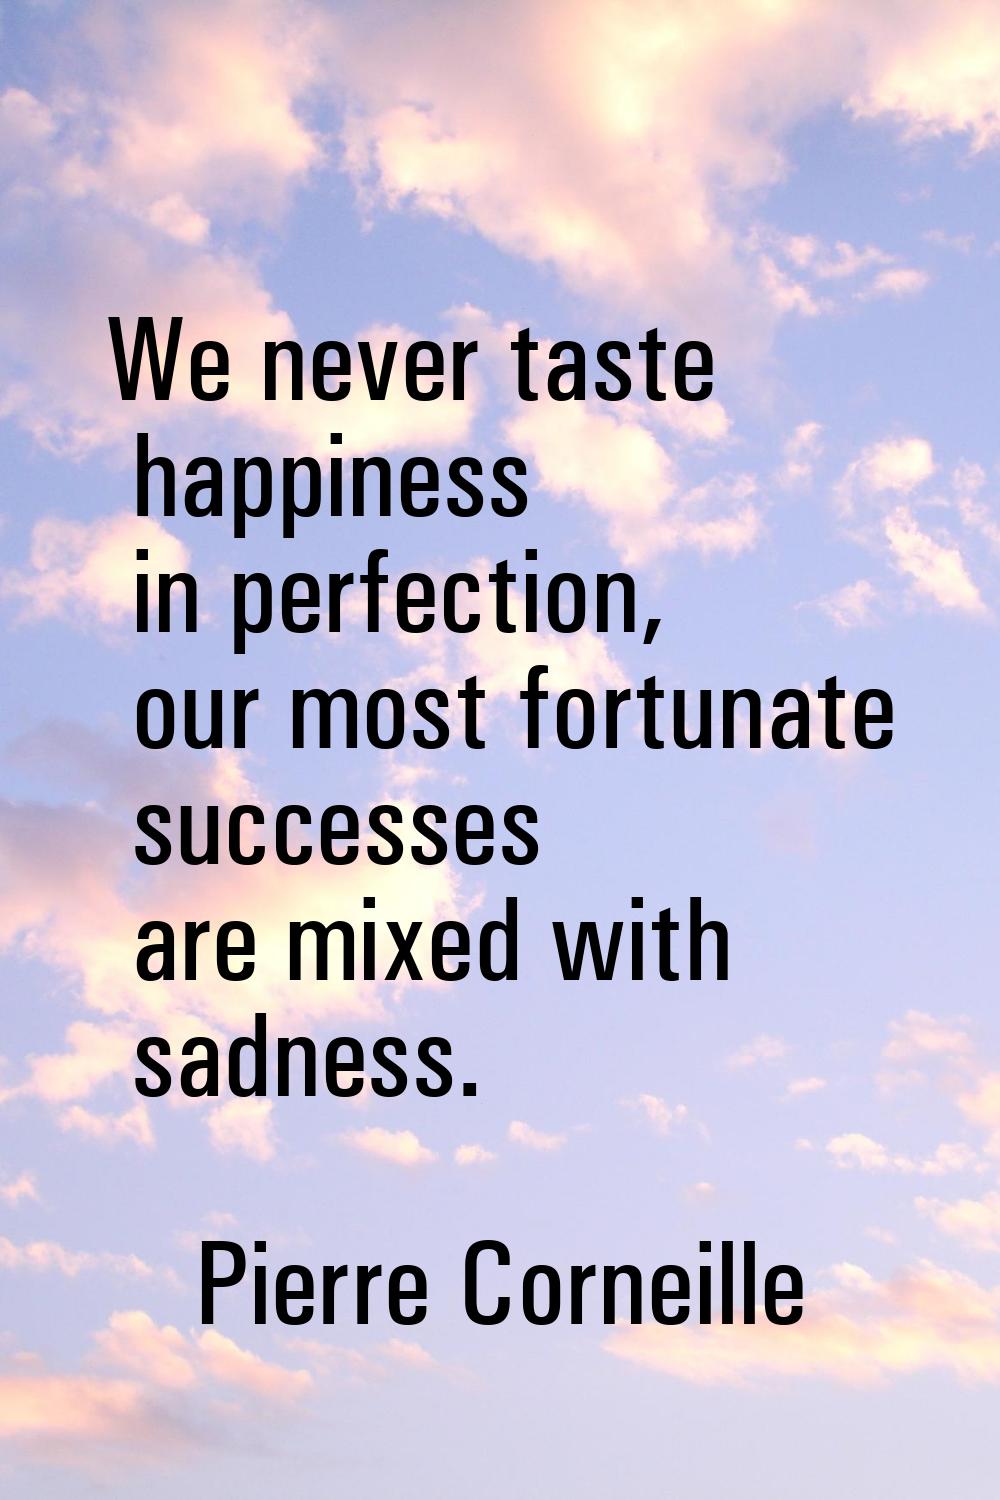 We never taste happiness in perfection, our most fortunate successes are mixed with sadness.